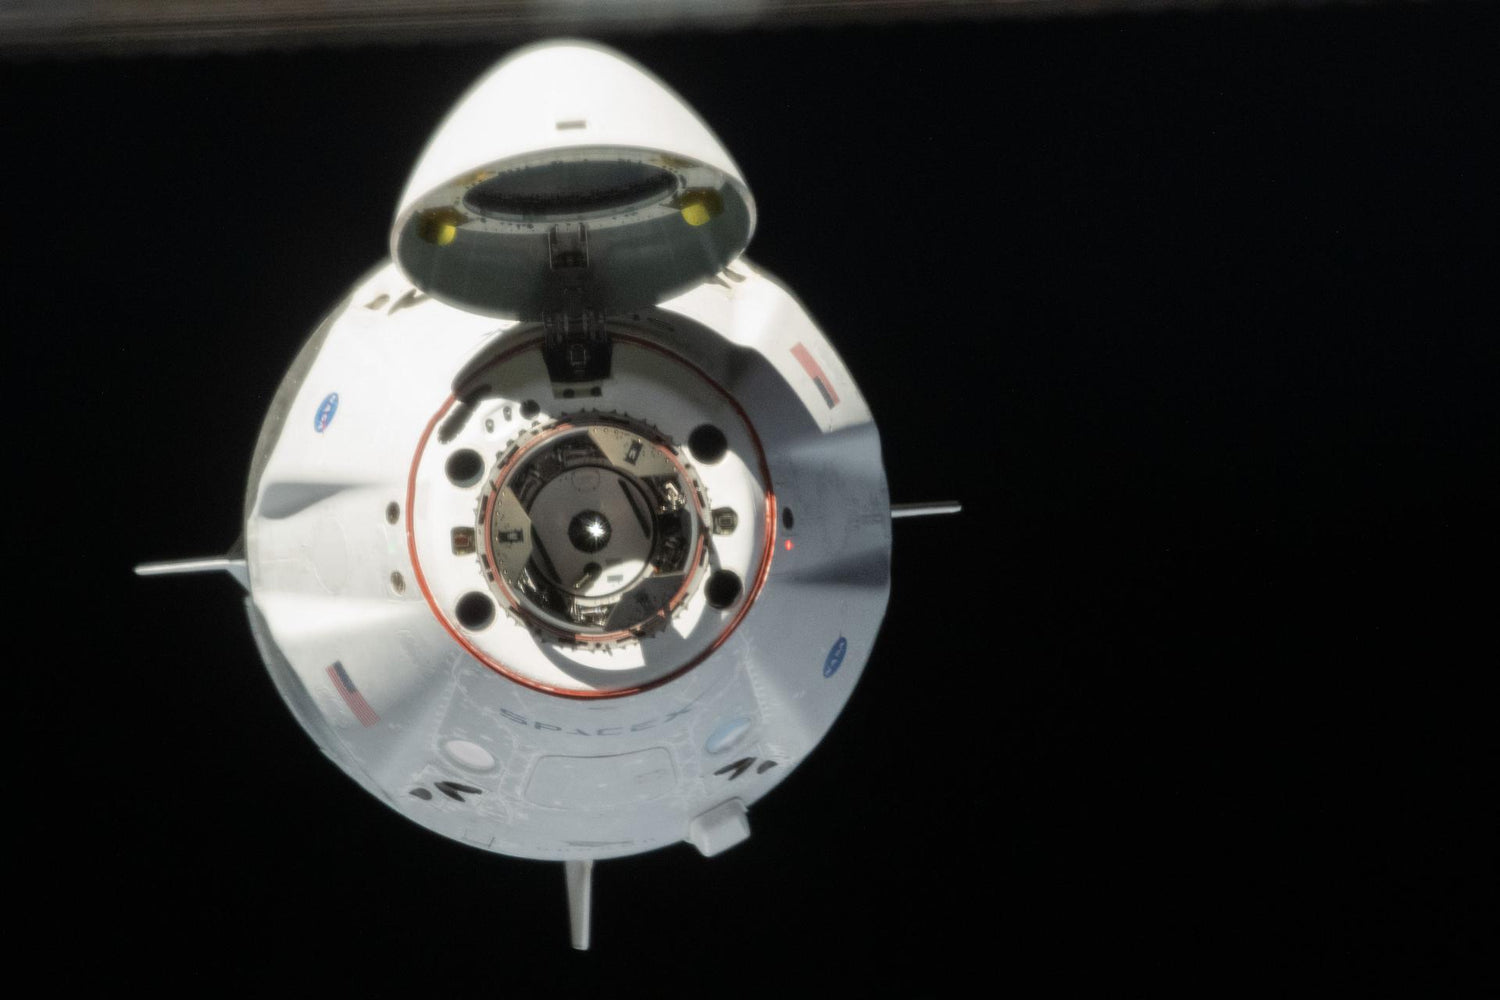 NASA's Head of Human Spaceflight says SpaceX's Crew Dragon is 'doing great' at the Space Station